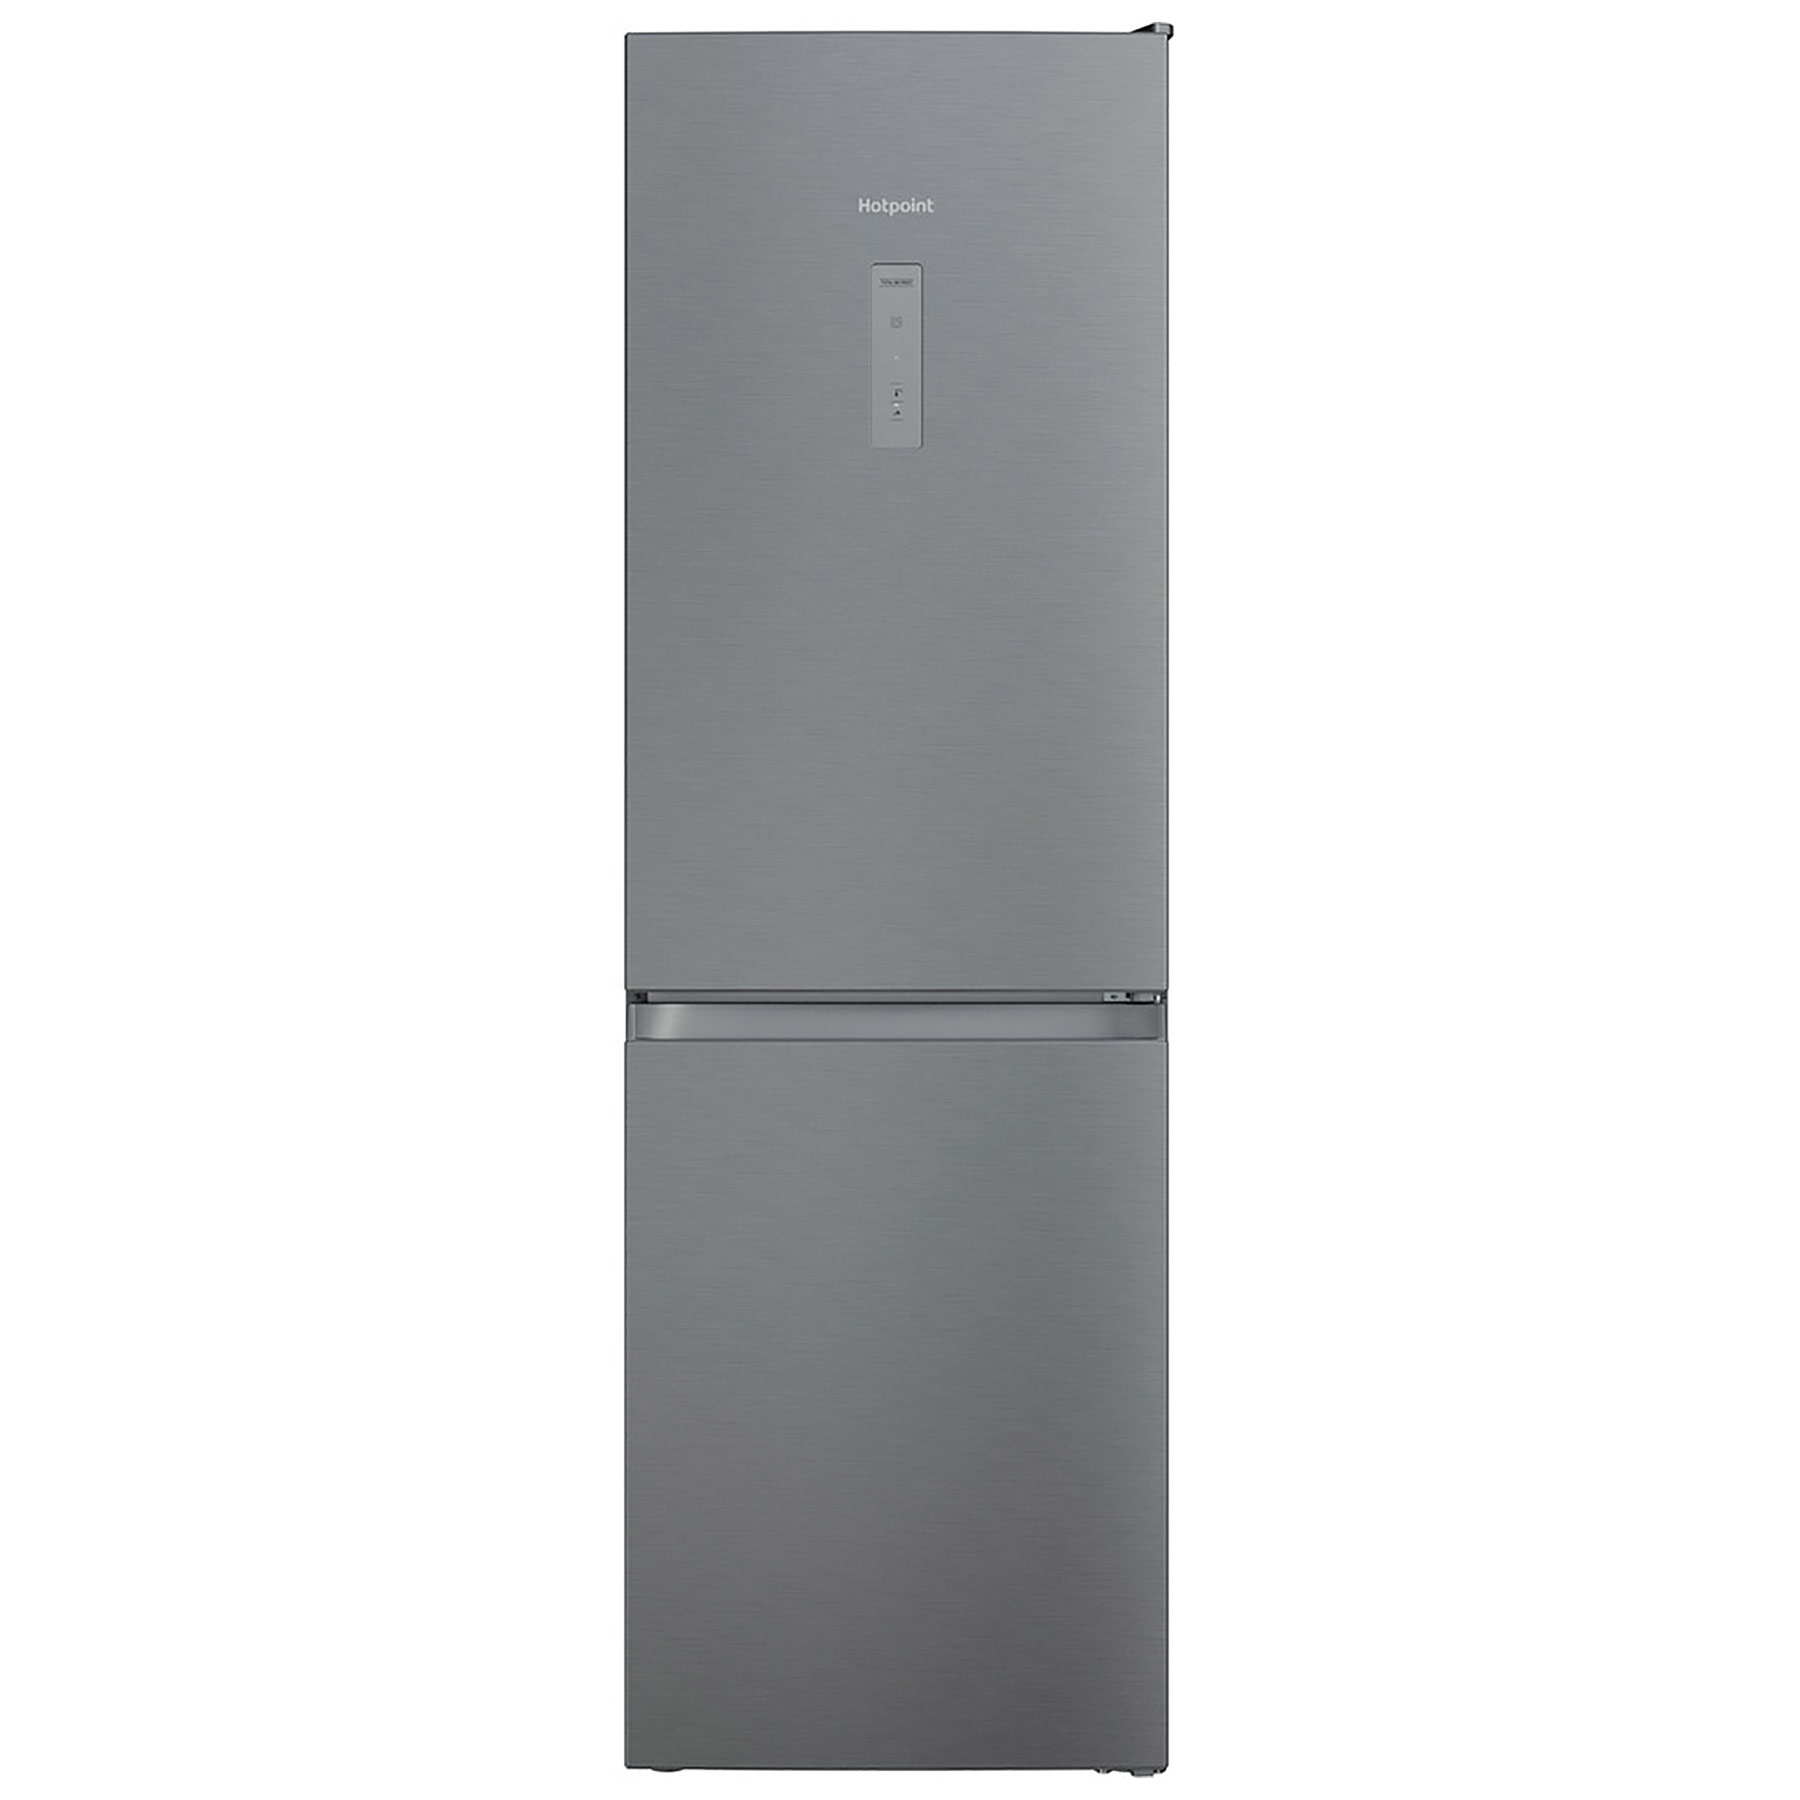 Image of Hotpoint H5X82OSX 60cm Frost Free Fridge Freezer in Steel 1 91m E Rate